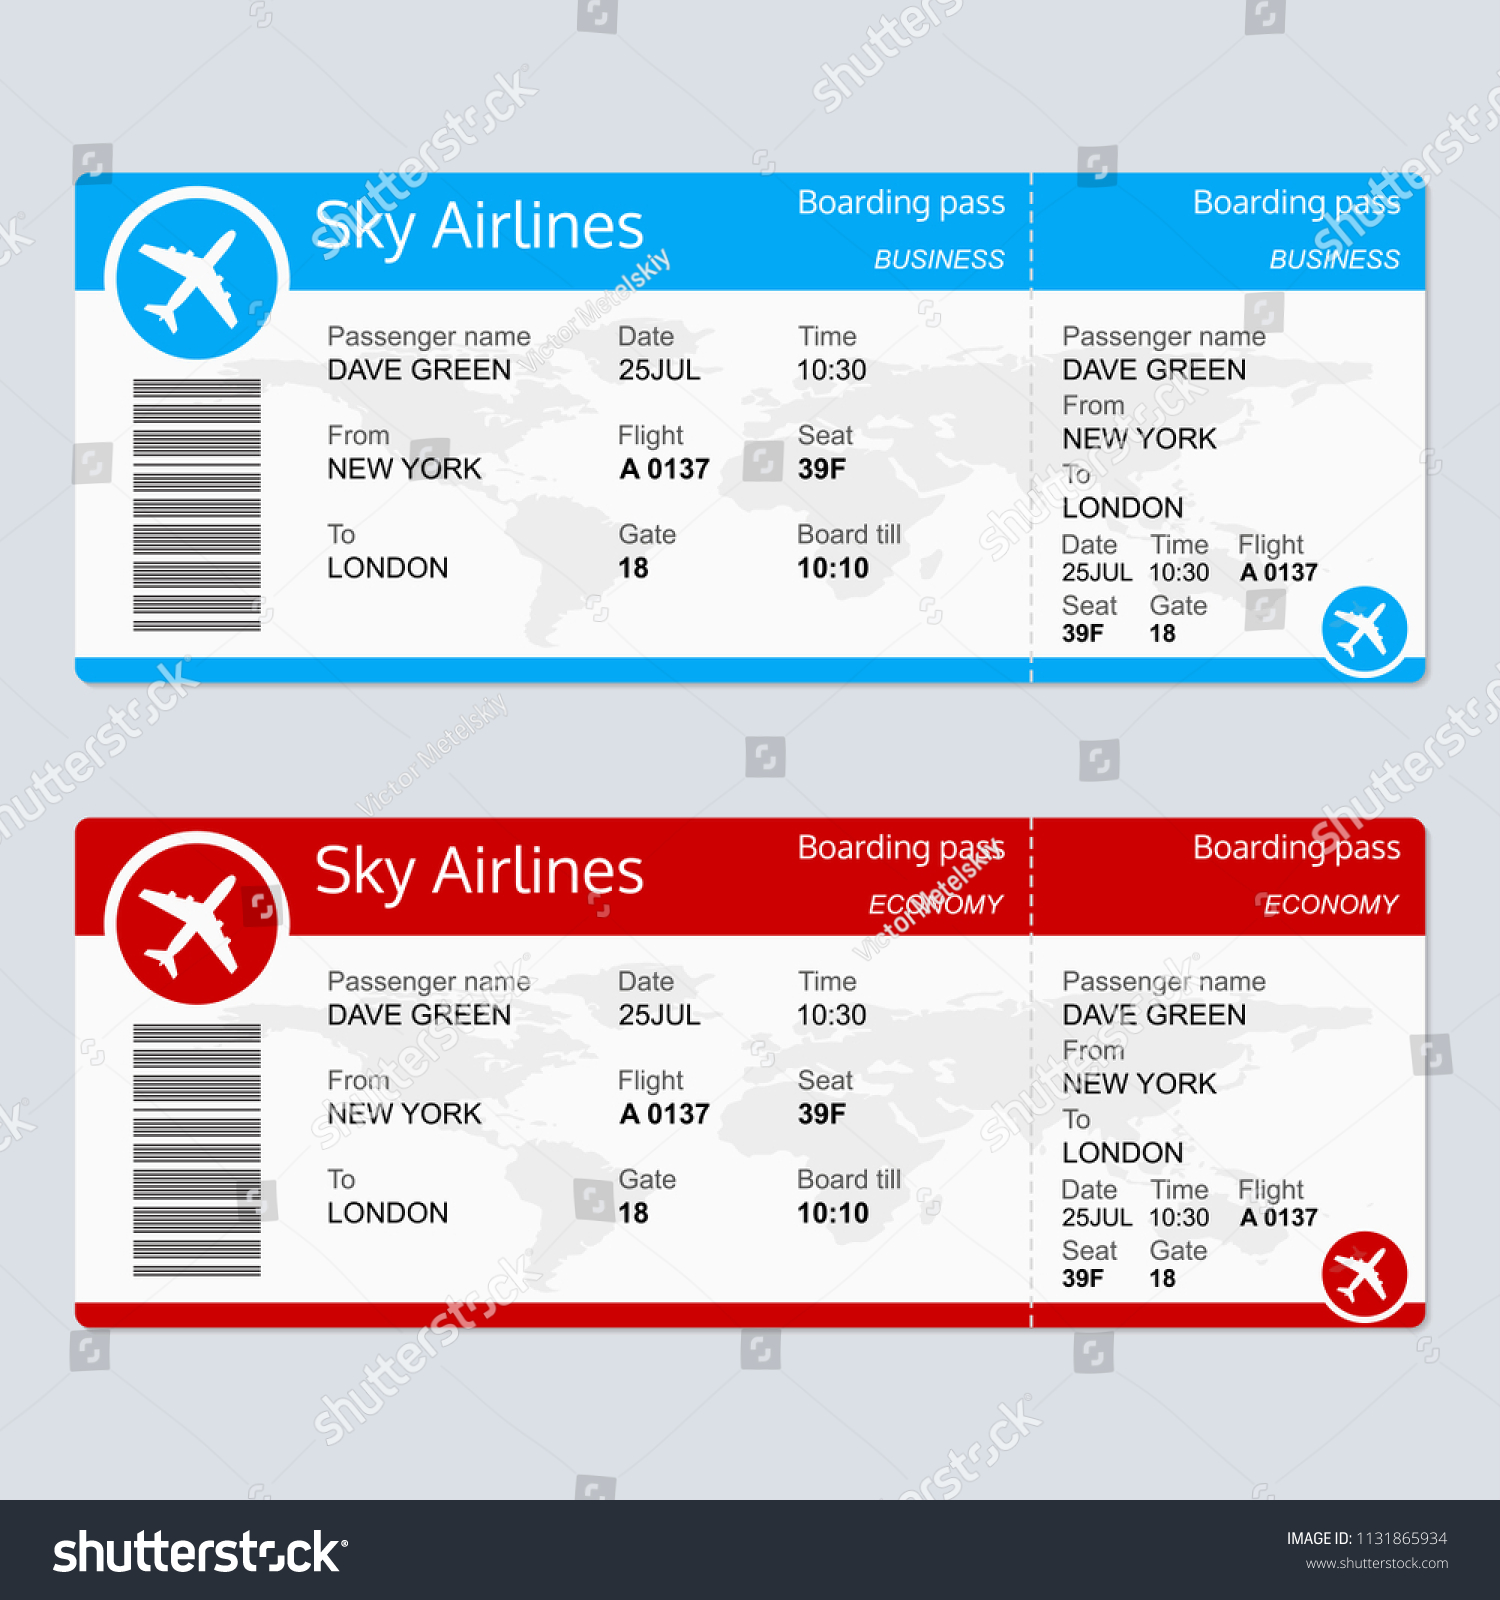 Blank Boarding Pass Template from image.shutterstock.com